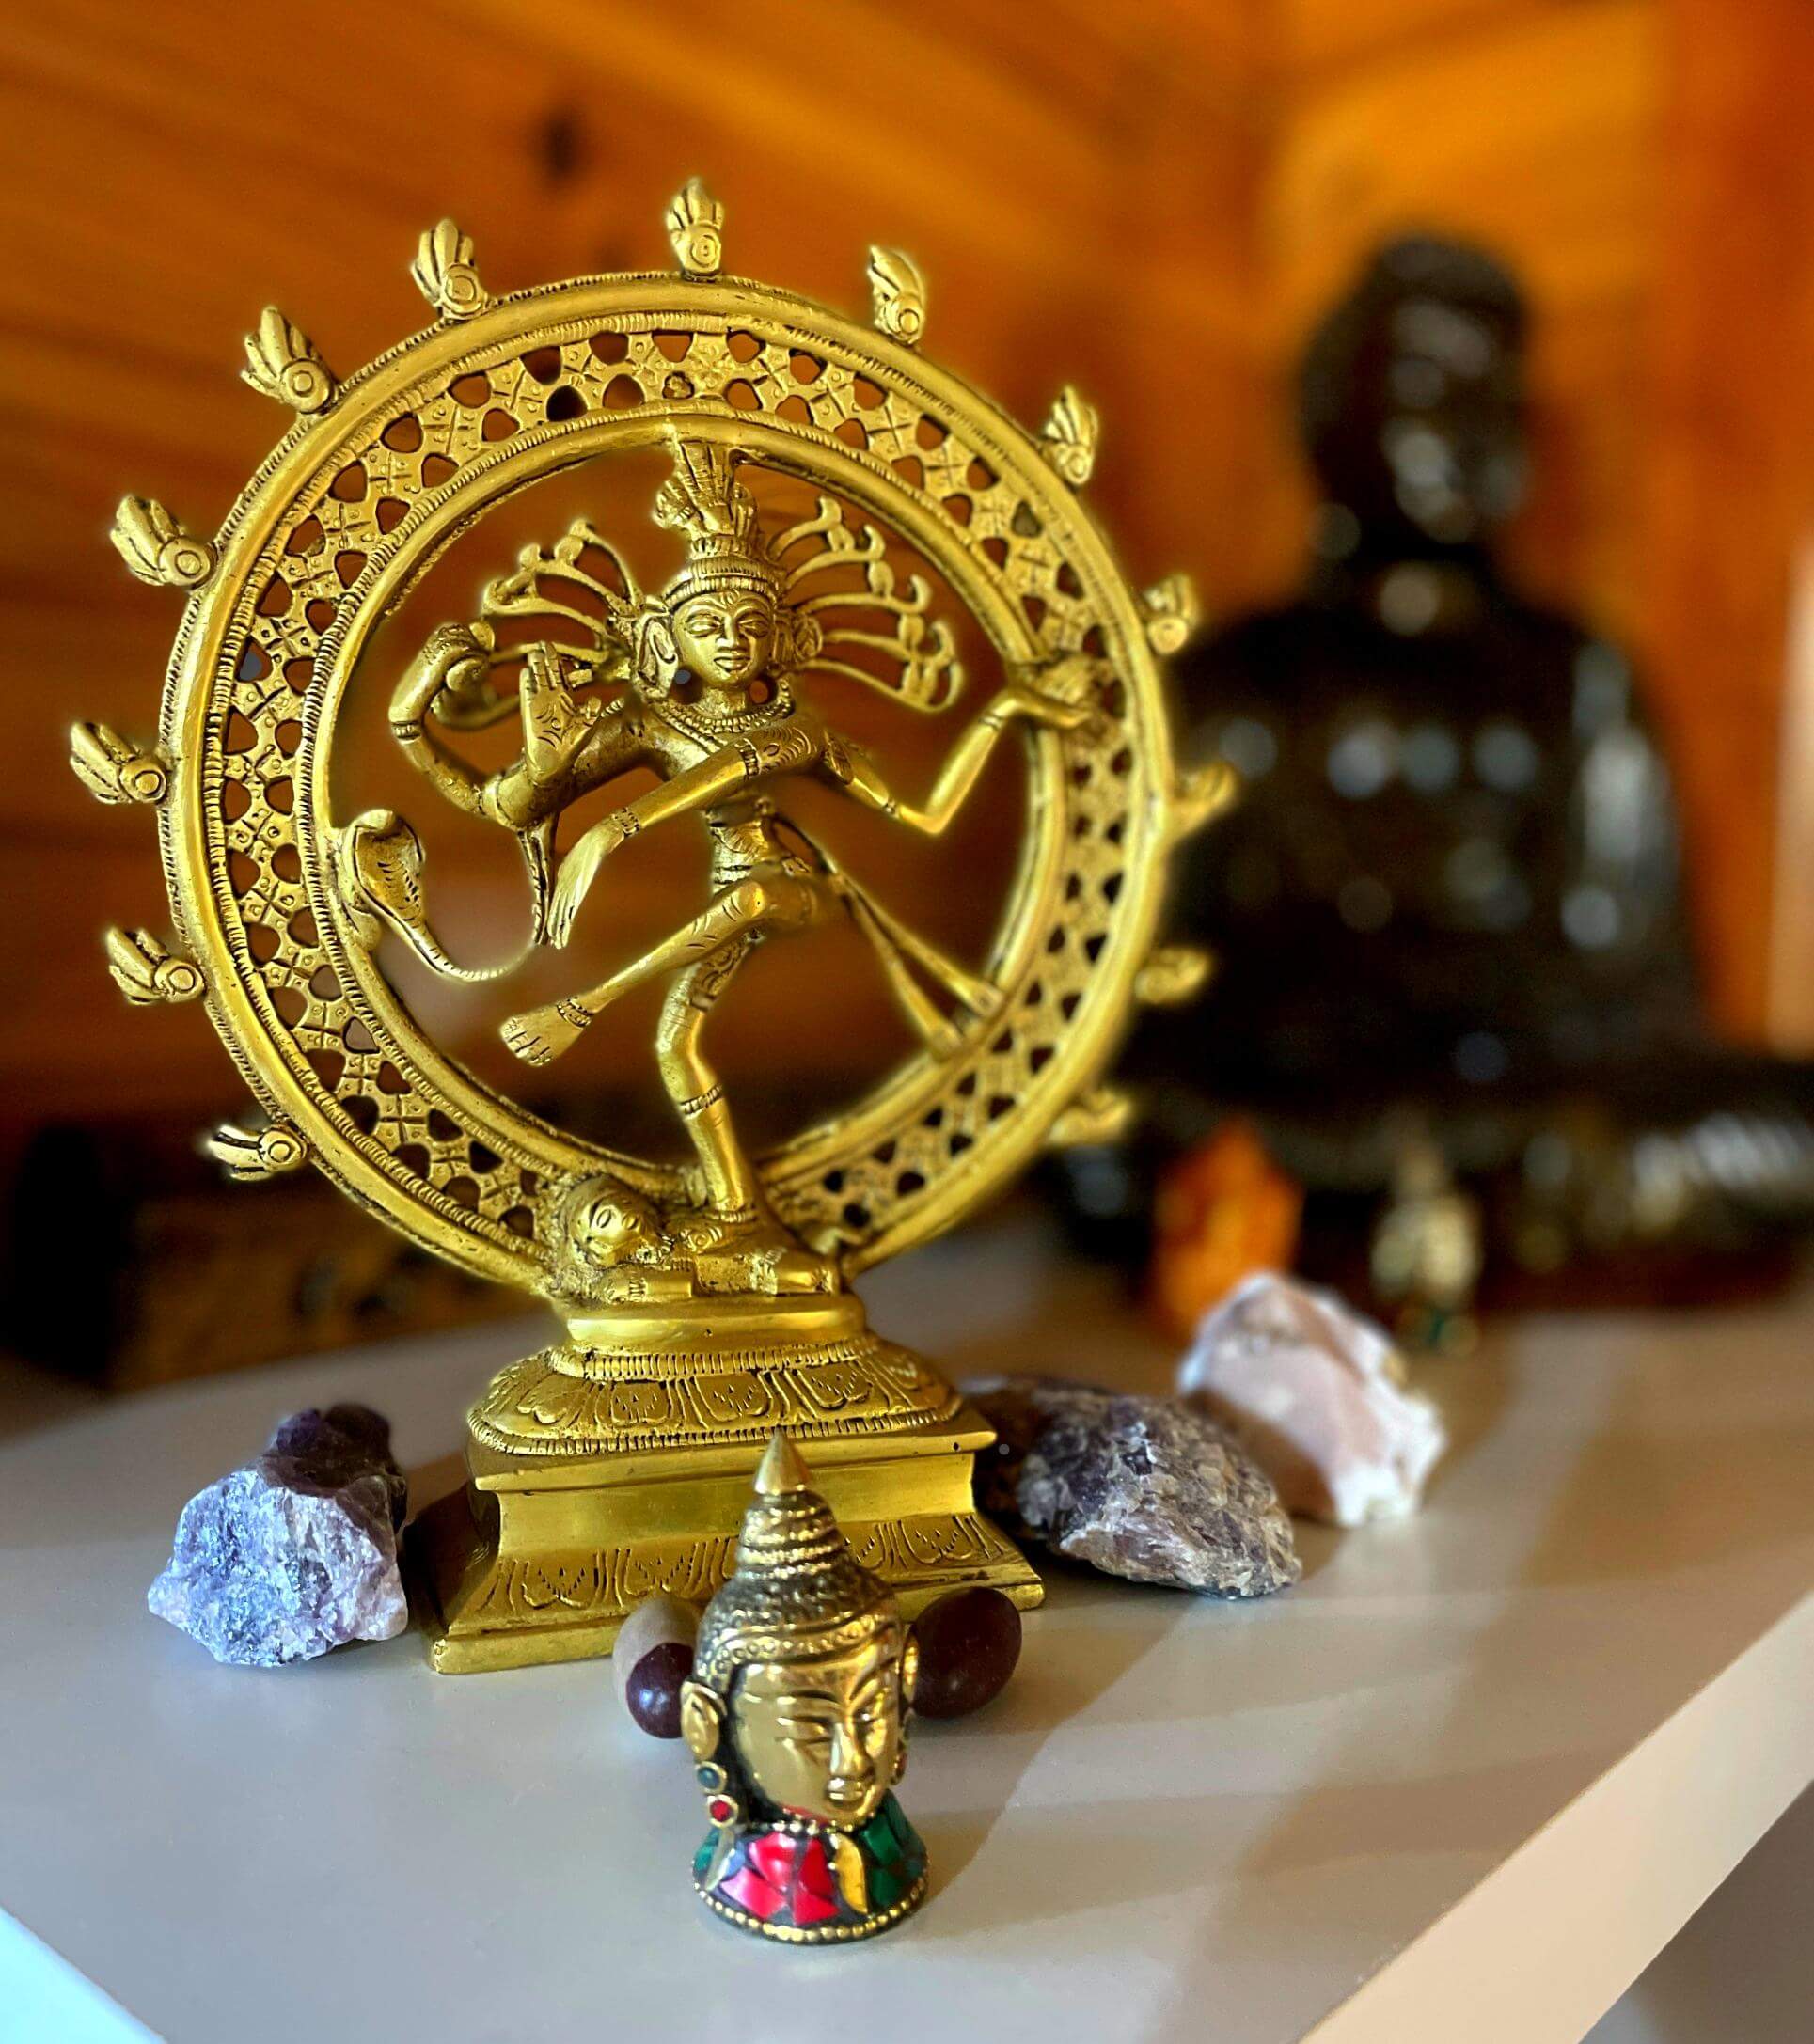 Vasudhaiva Kutumbakam - Sanatan Dharma believes that Lord Shiva has many  guises & representations. But perhaps the most familiar iconography is the  dancing figure within a circle of fire, that is 